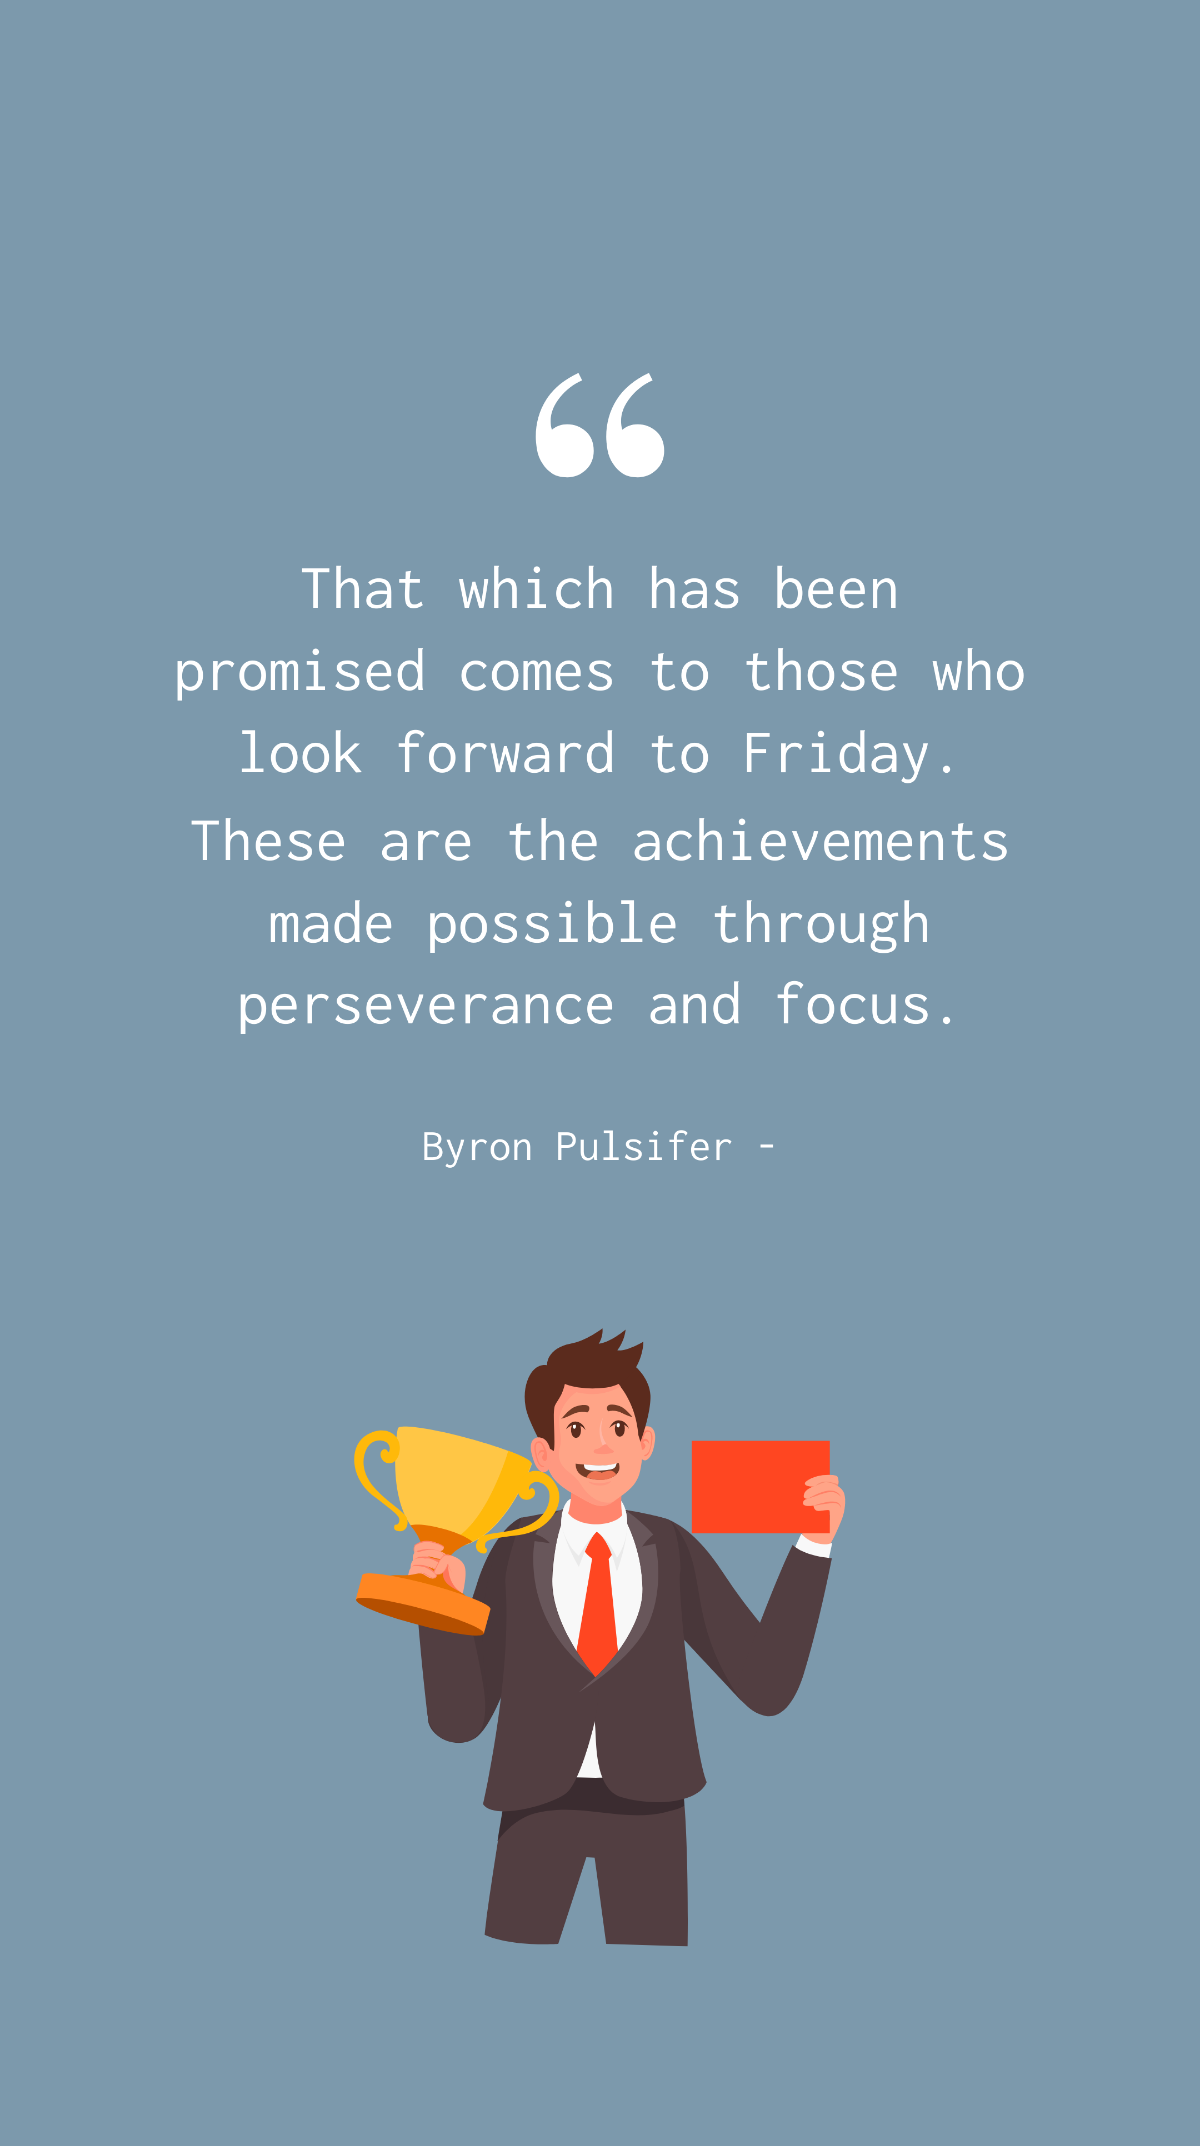 Byron Pulsifer - That which has been promised comes to those who look forward to Friday. These are the achievements made possible through perseverance and focus. Template